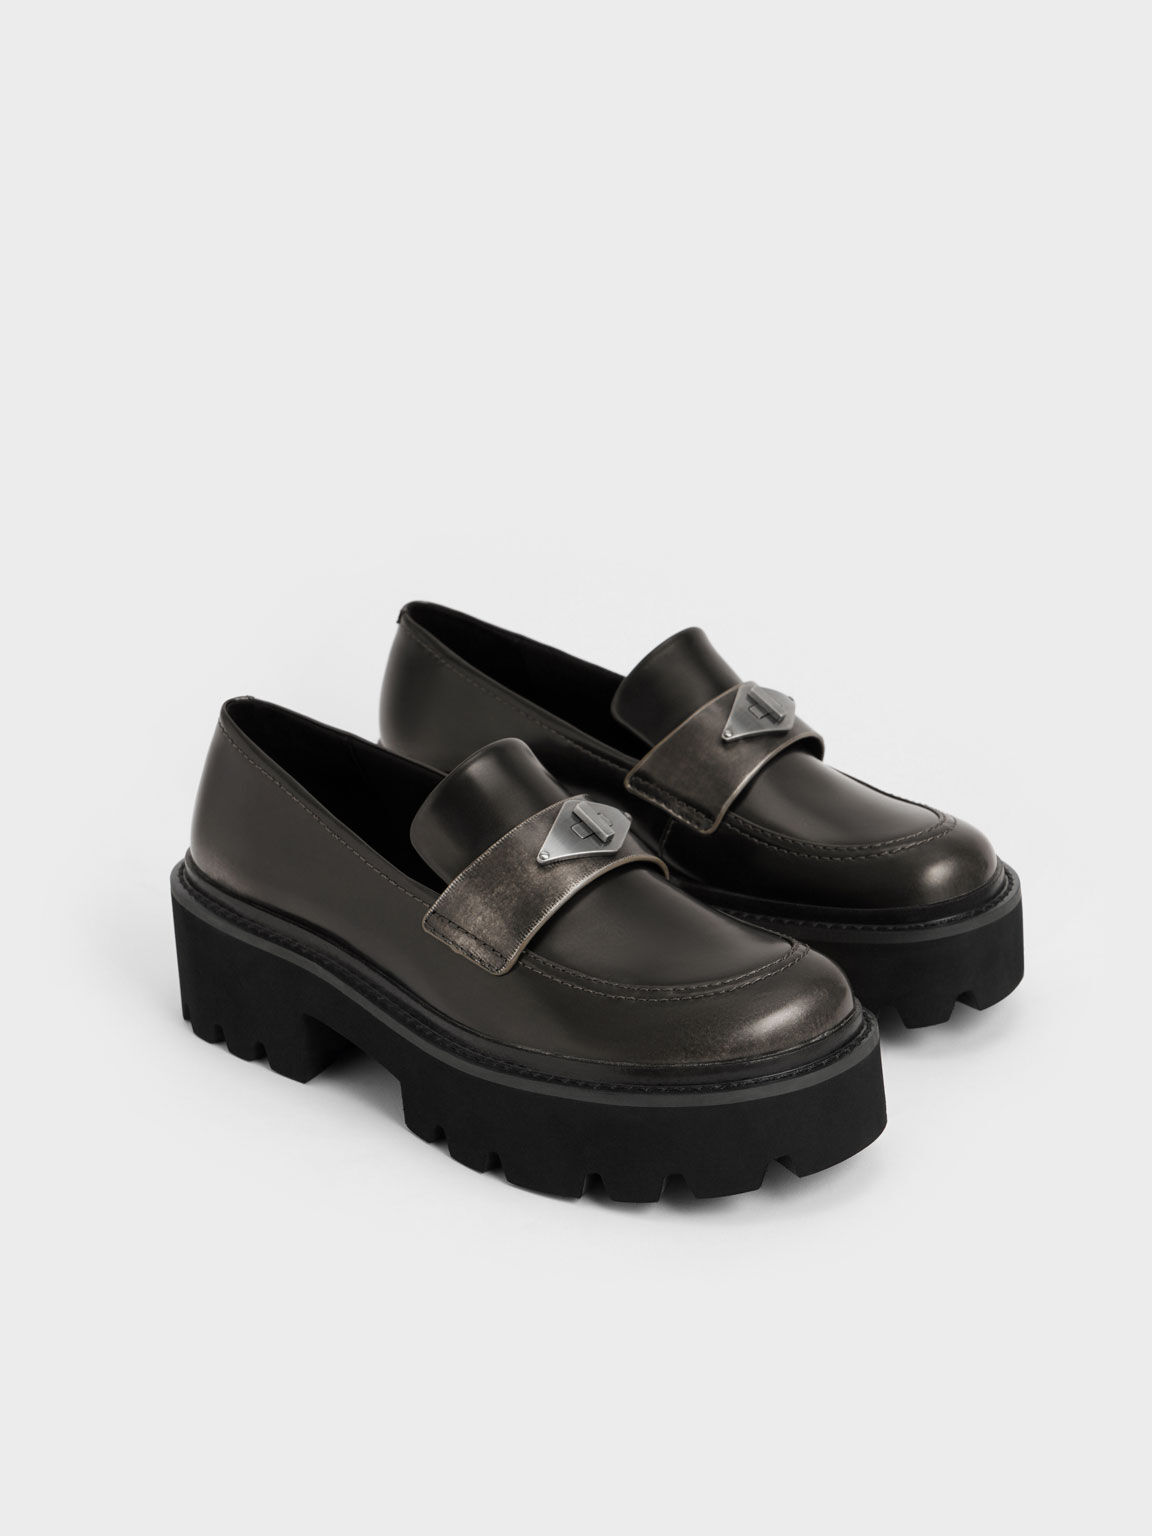 Metallic Accent Chunky Platform Penny Loafers, Black Textured, hi-res